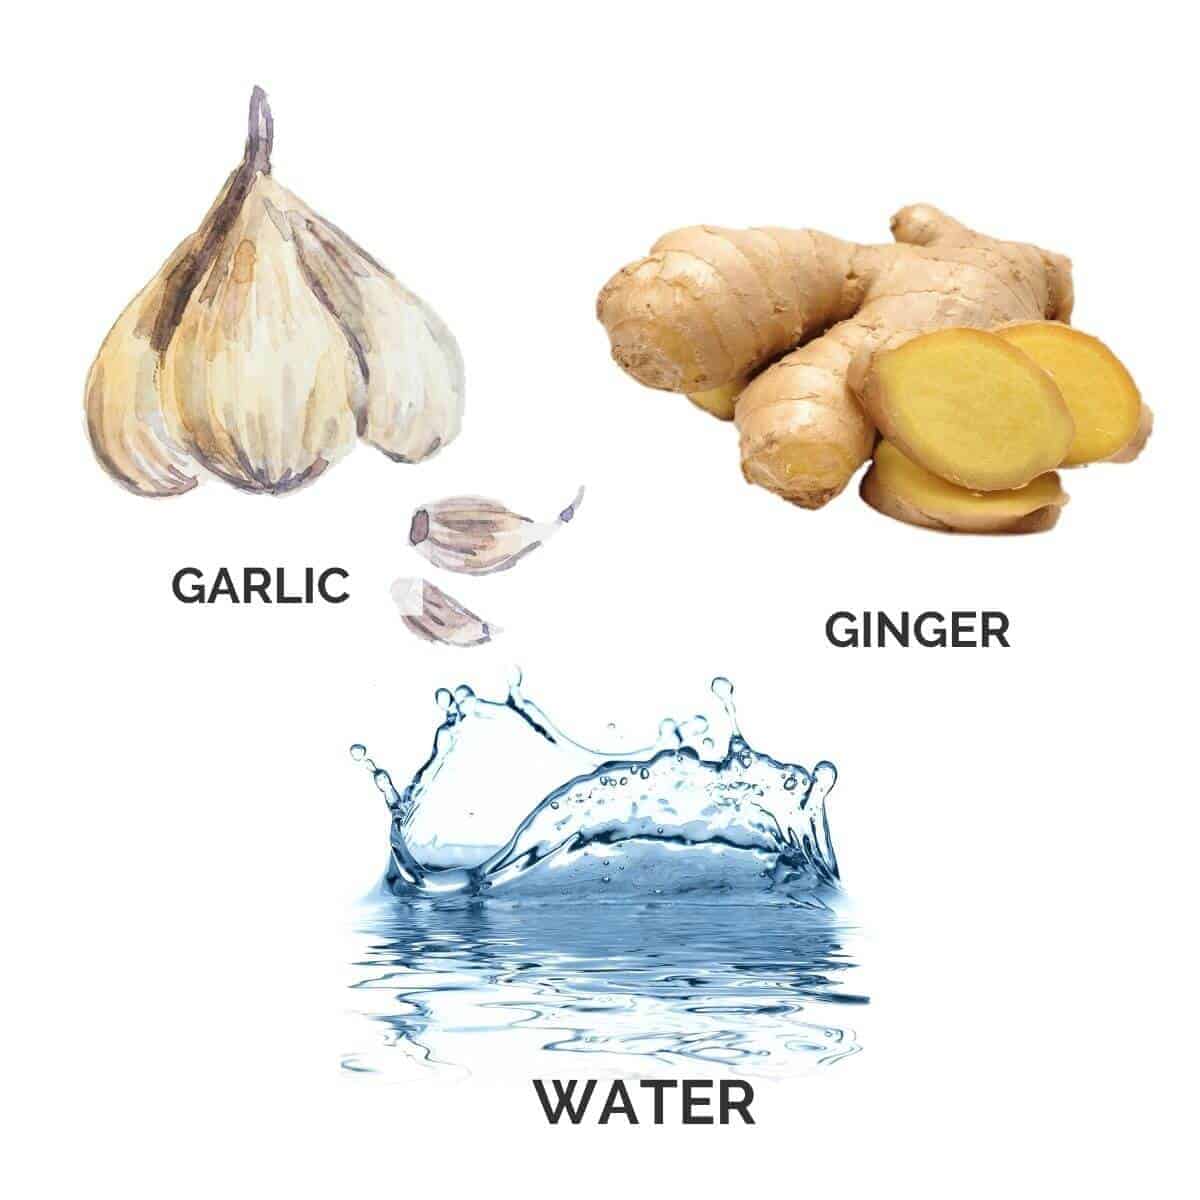 Ingredients for making garlic and ginger paste on a white background.